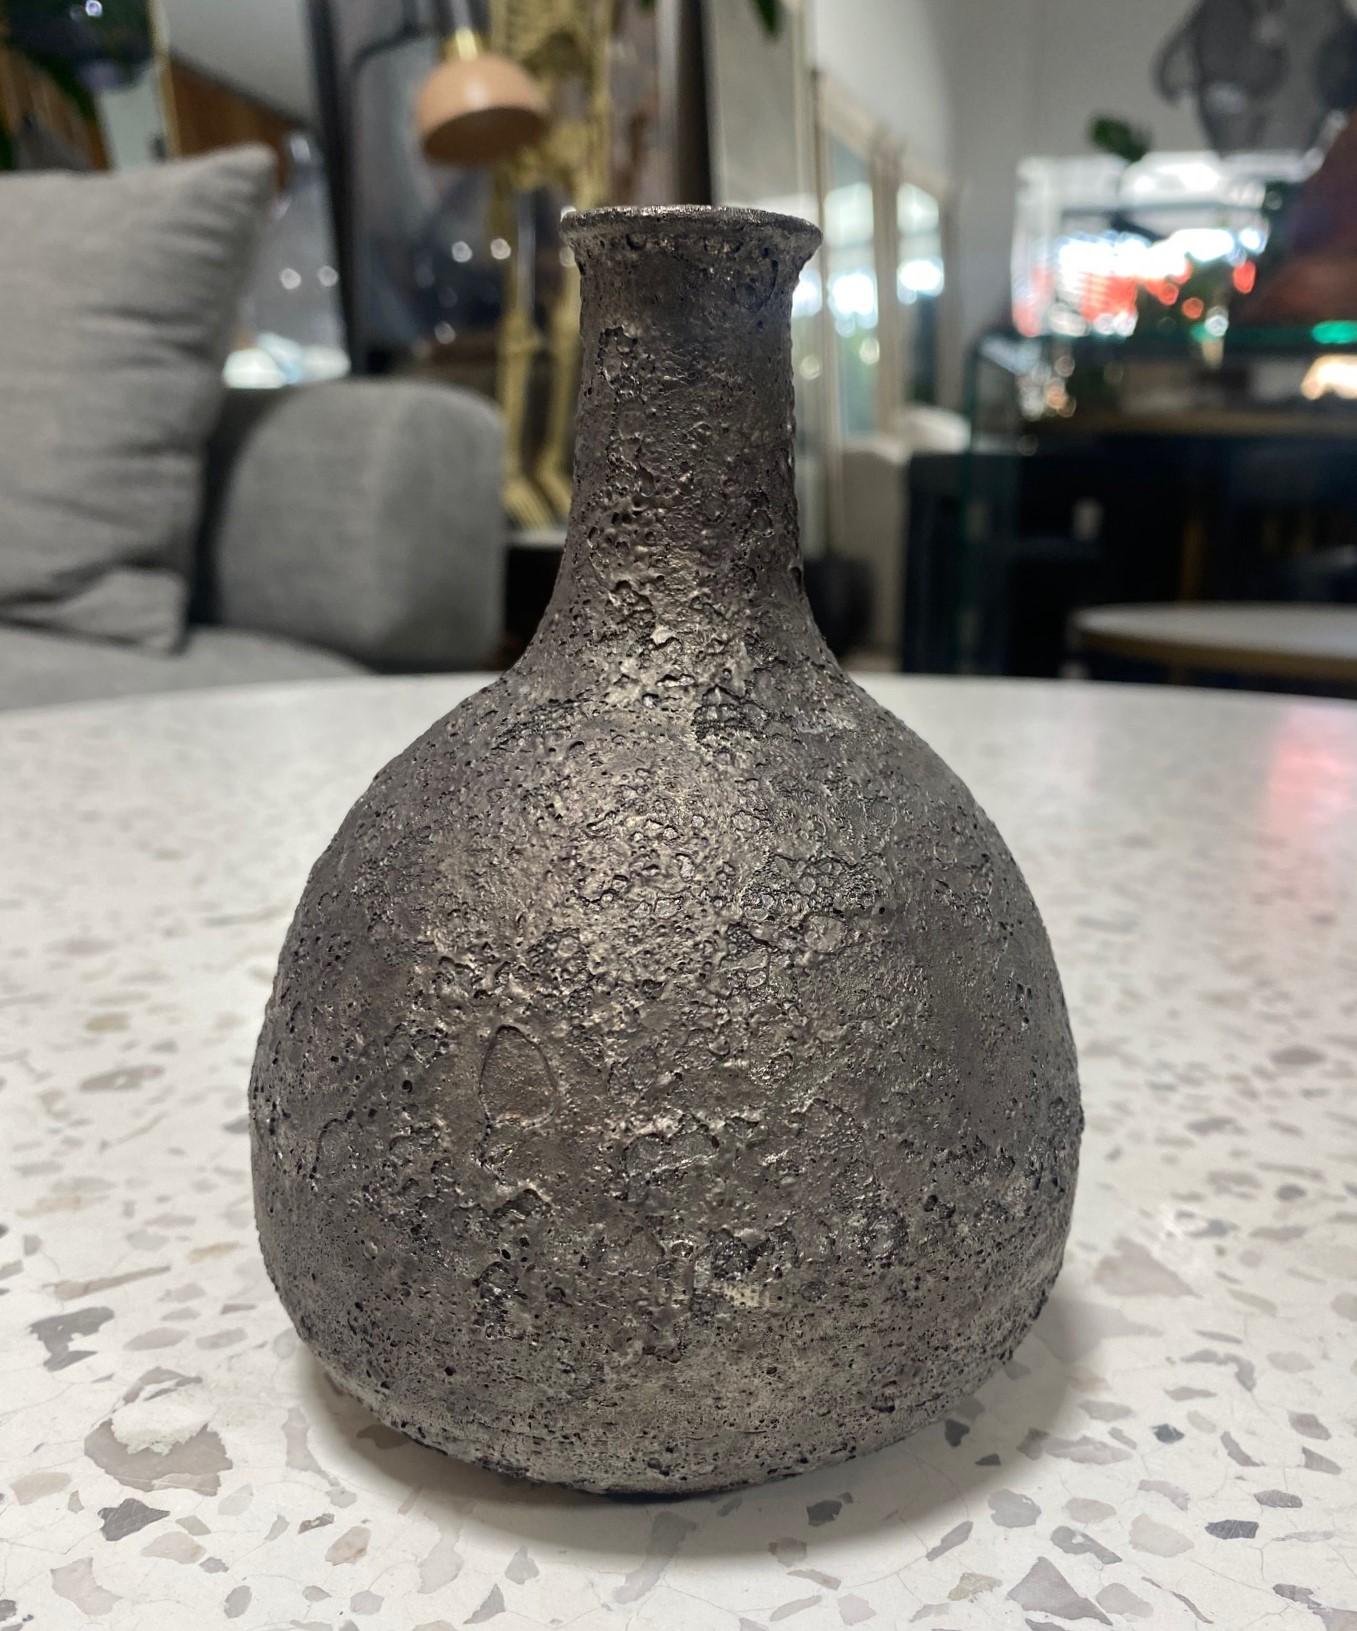 A wonderfully designed work by famed American California Studio master ceramist Beatrice Wood featuring a gorgeous, dark, iridescent metallic volcanic lava crater muted glaze.  A classic and timeless shape, the dark silver/chocolate metallic-like